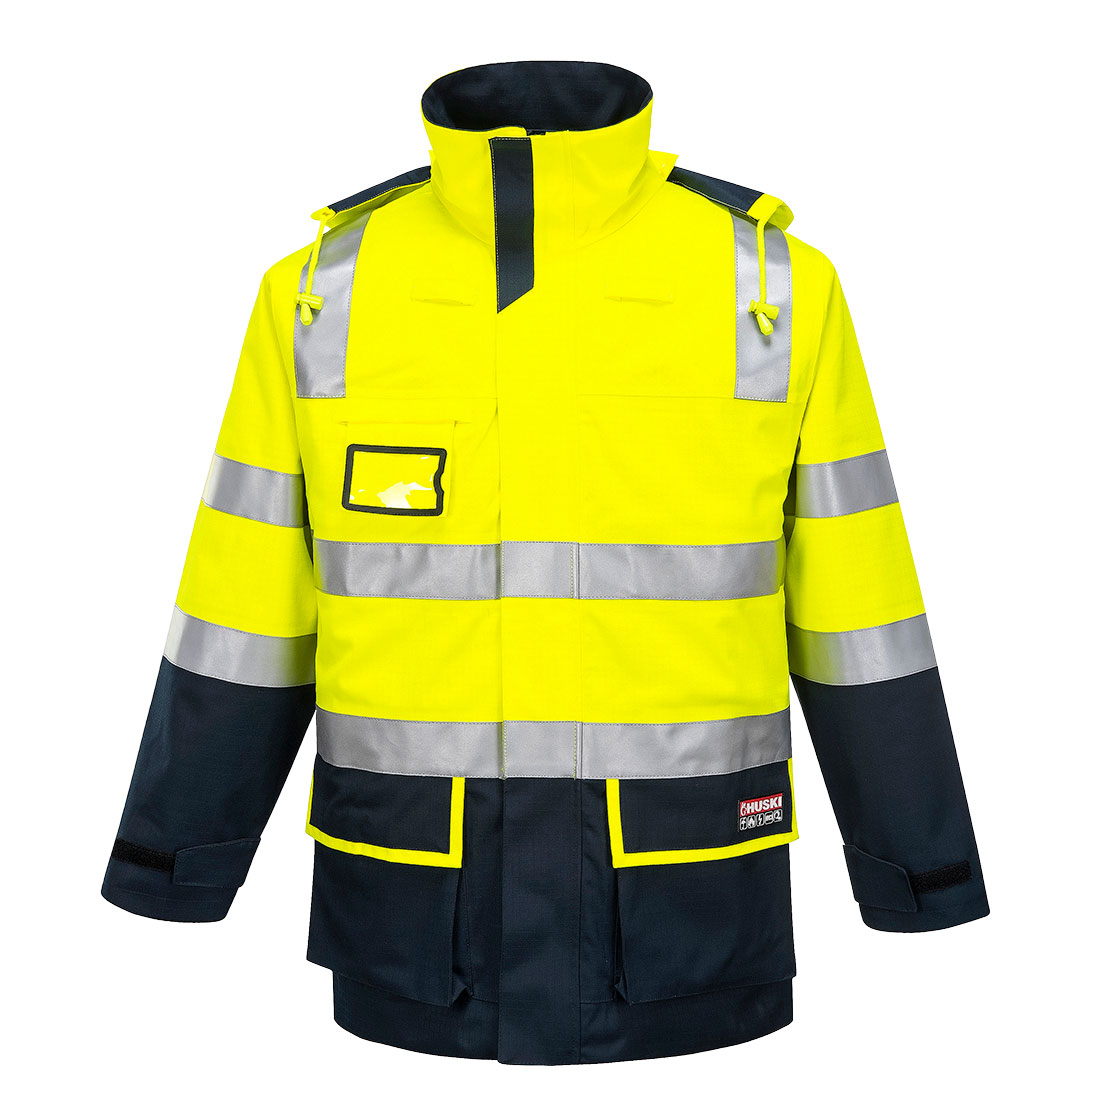 elevate safety-wear available